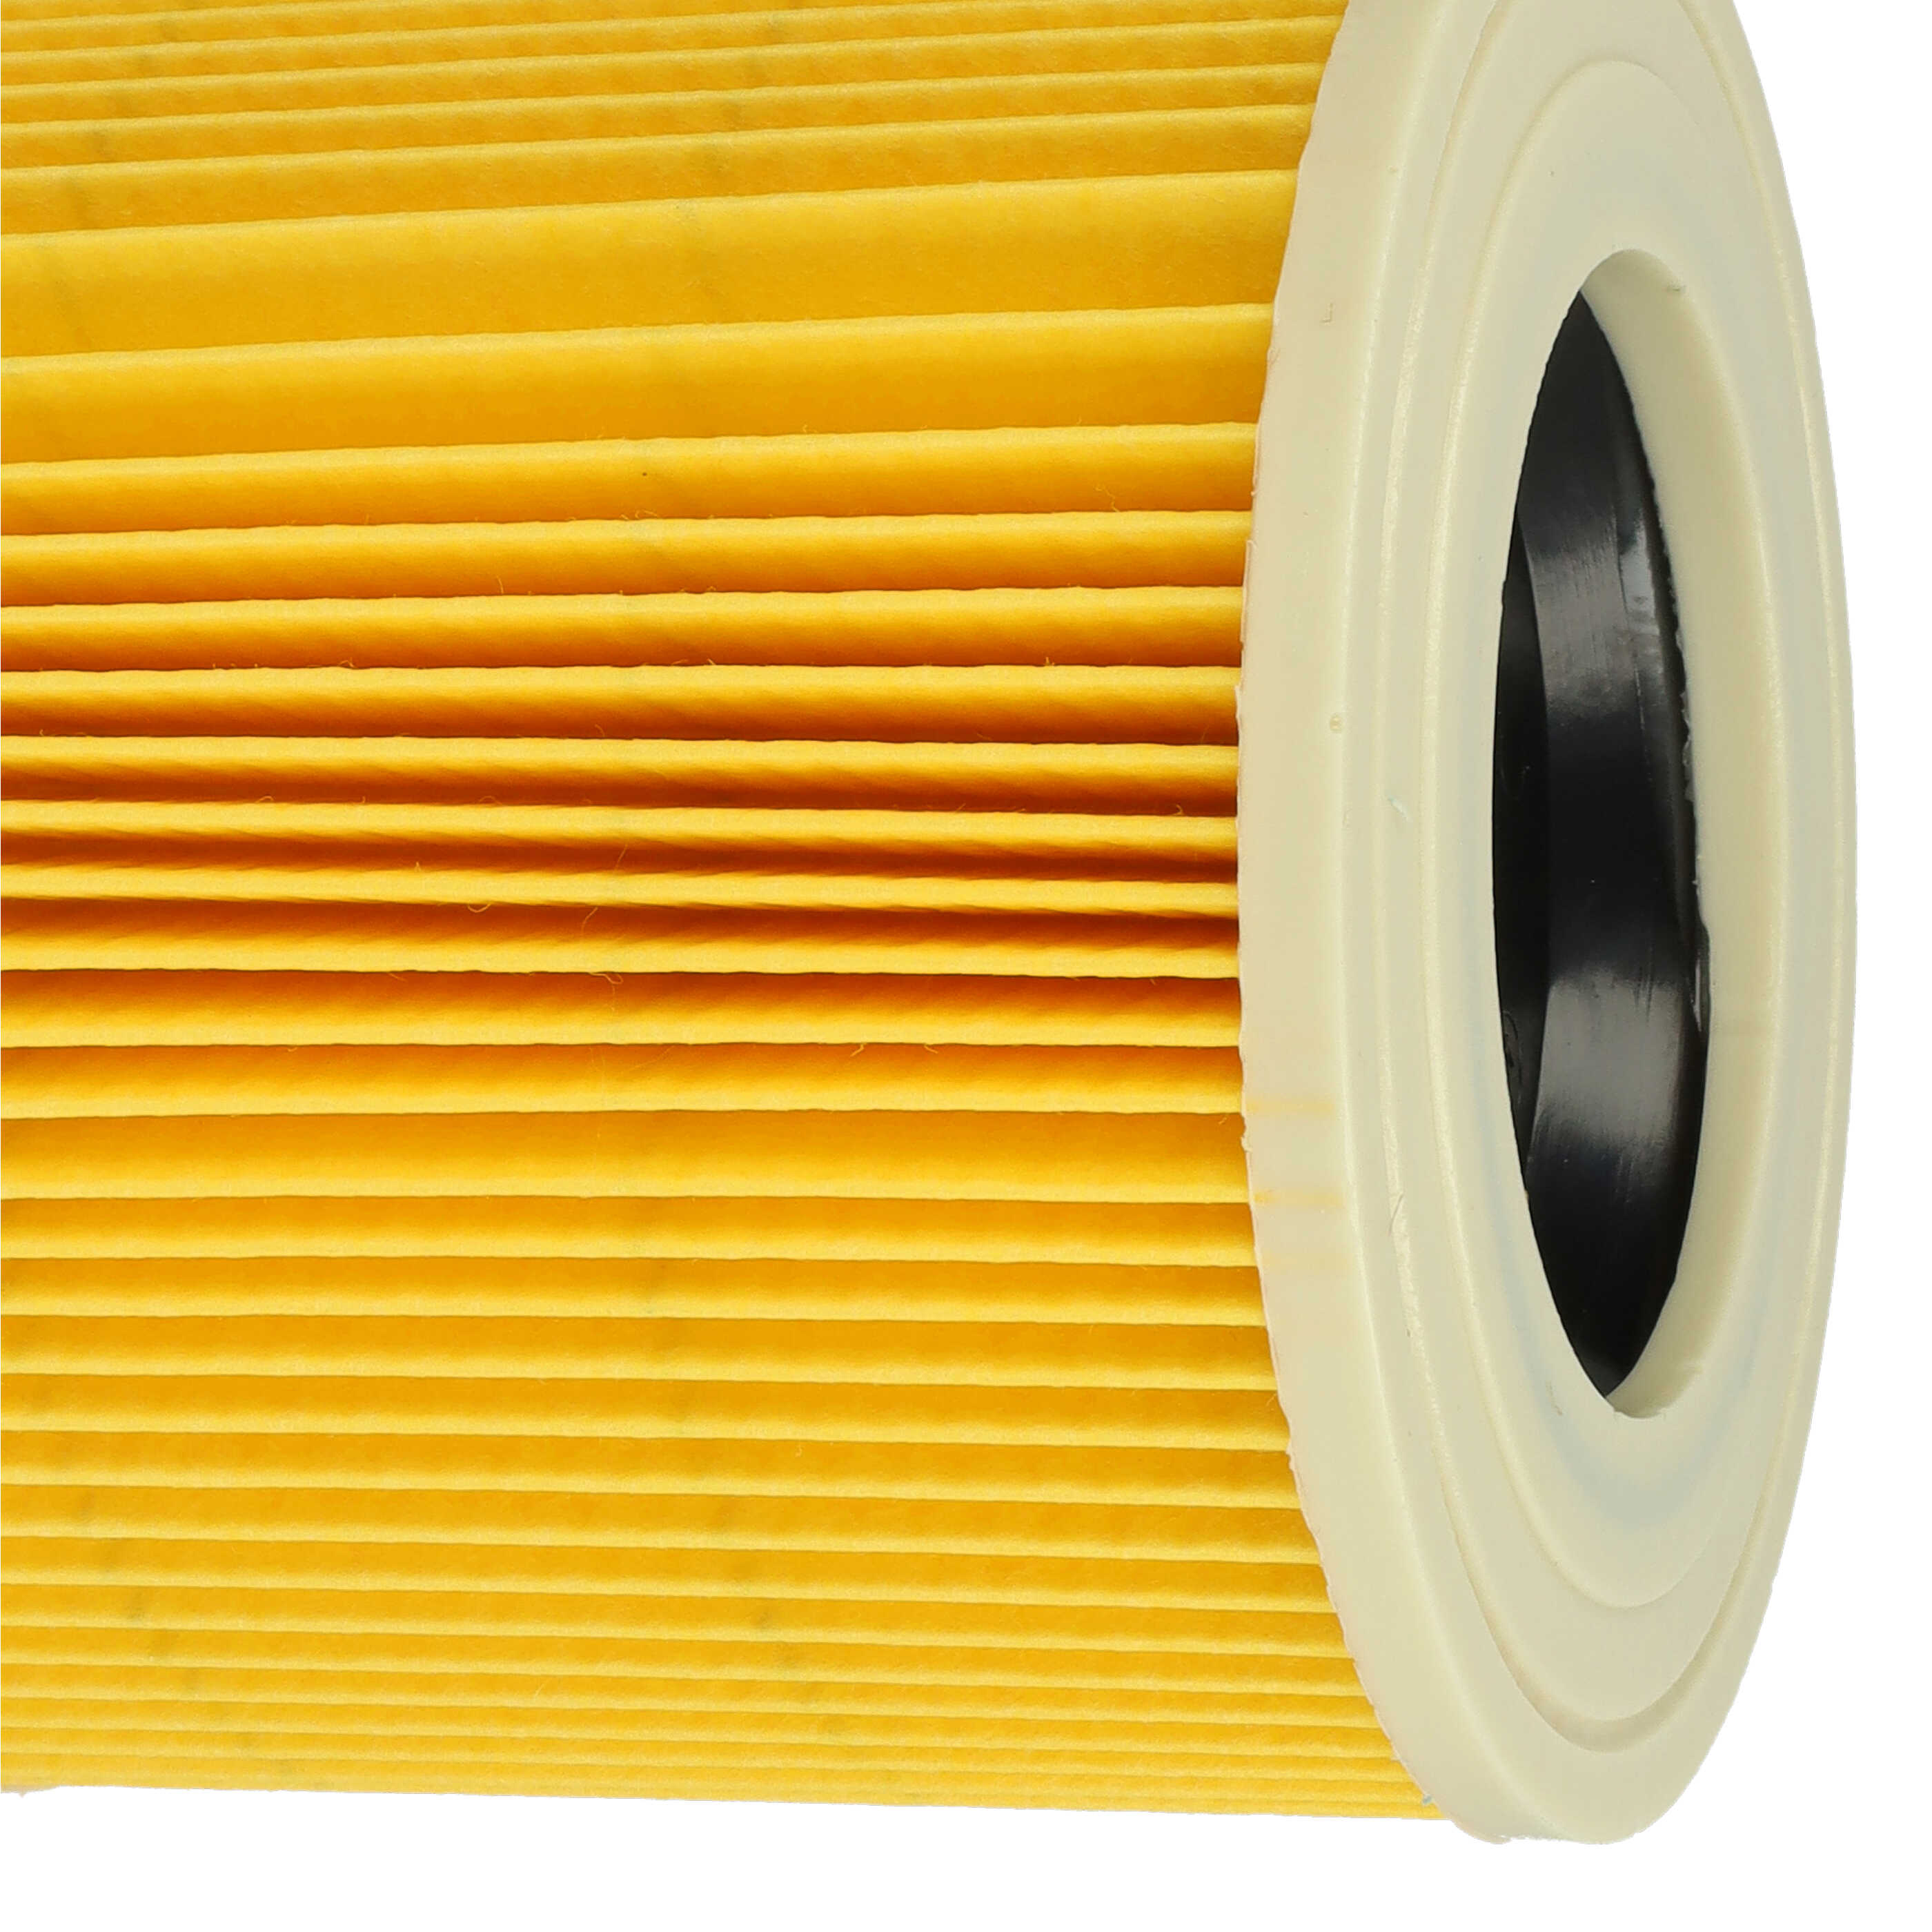 2x cartridge filter replaces Kärcher 2.863-303.0, 6.414-552.0, 6.414-547.0 for BaierVacuum Cleaner, yellow